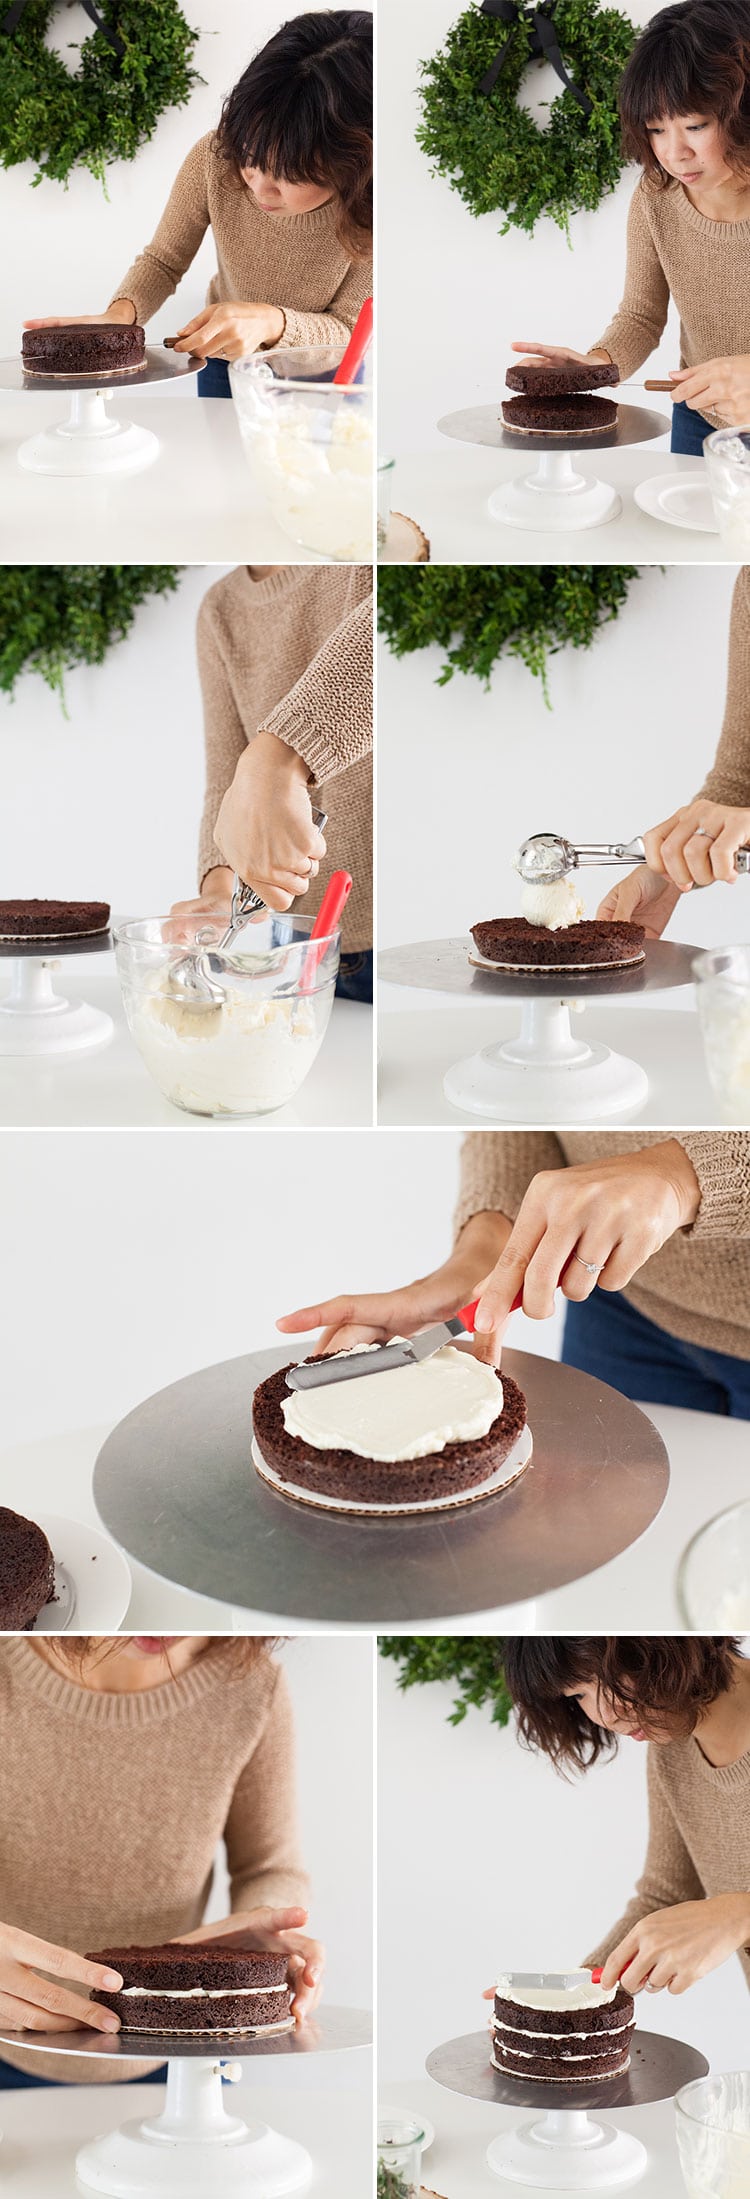 How To Decorate A Cake